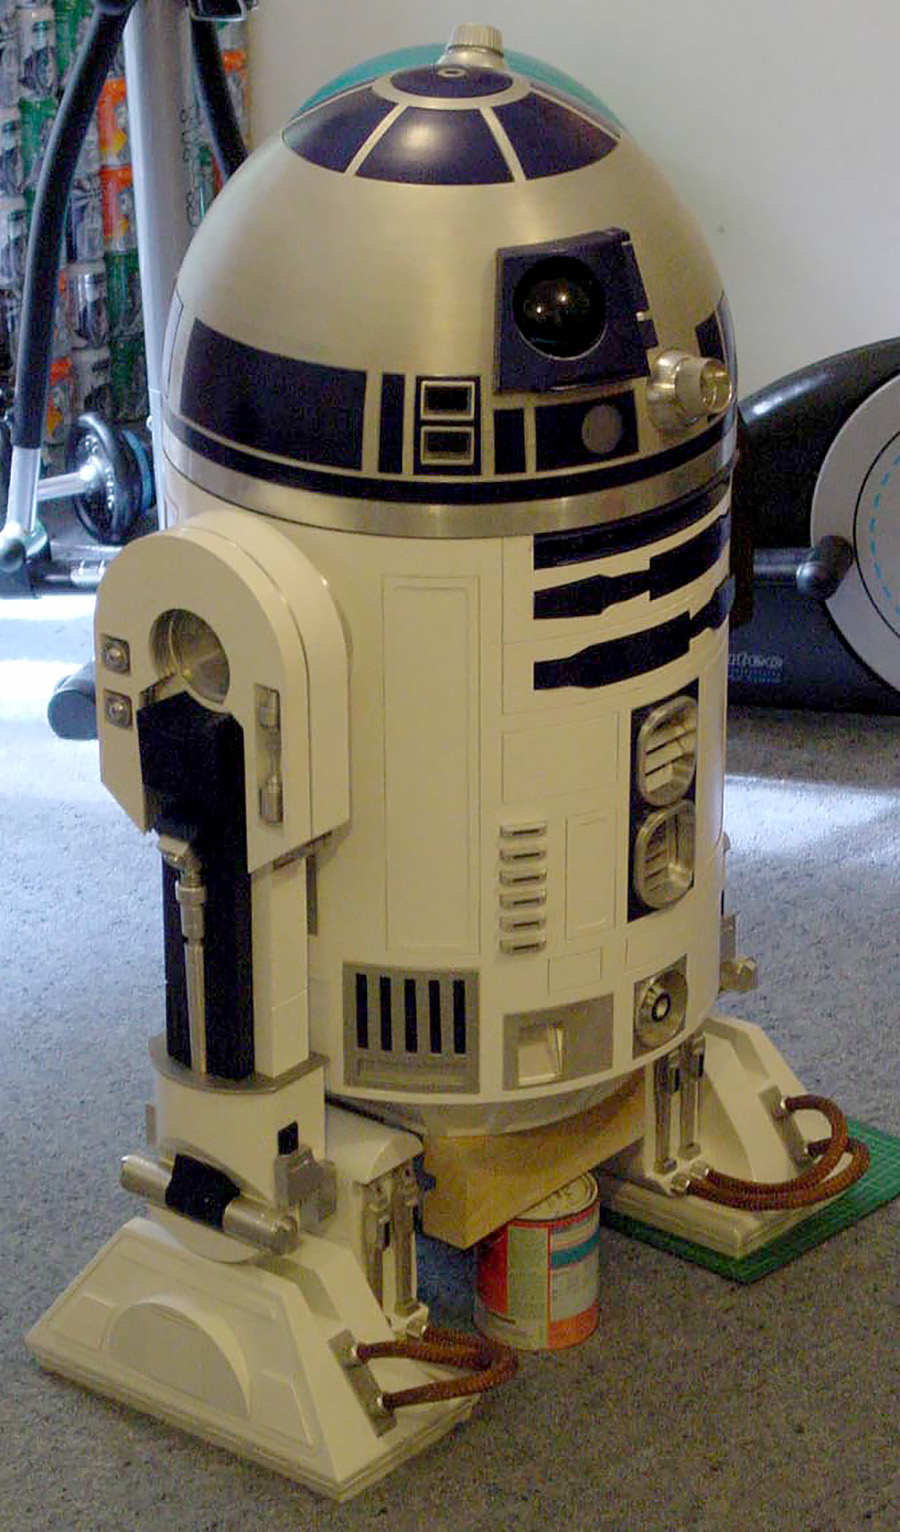 R2-D2 test fitting